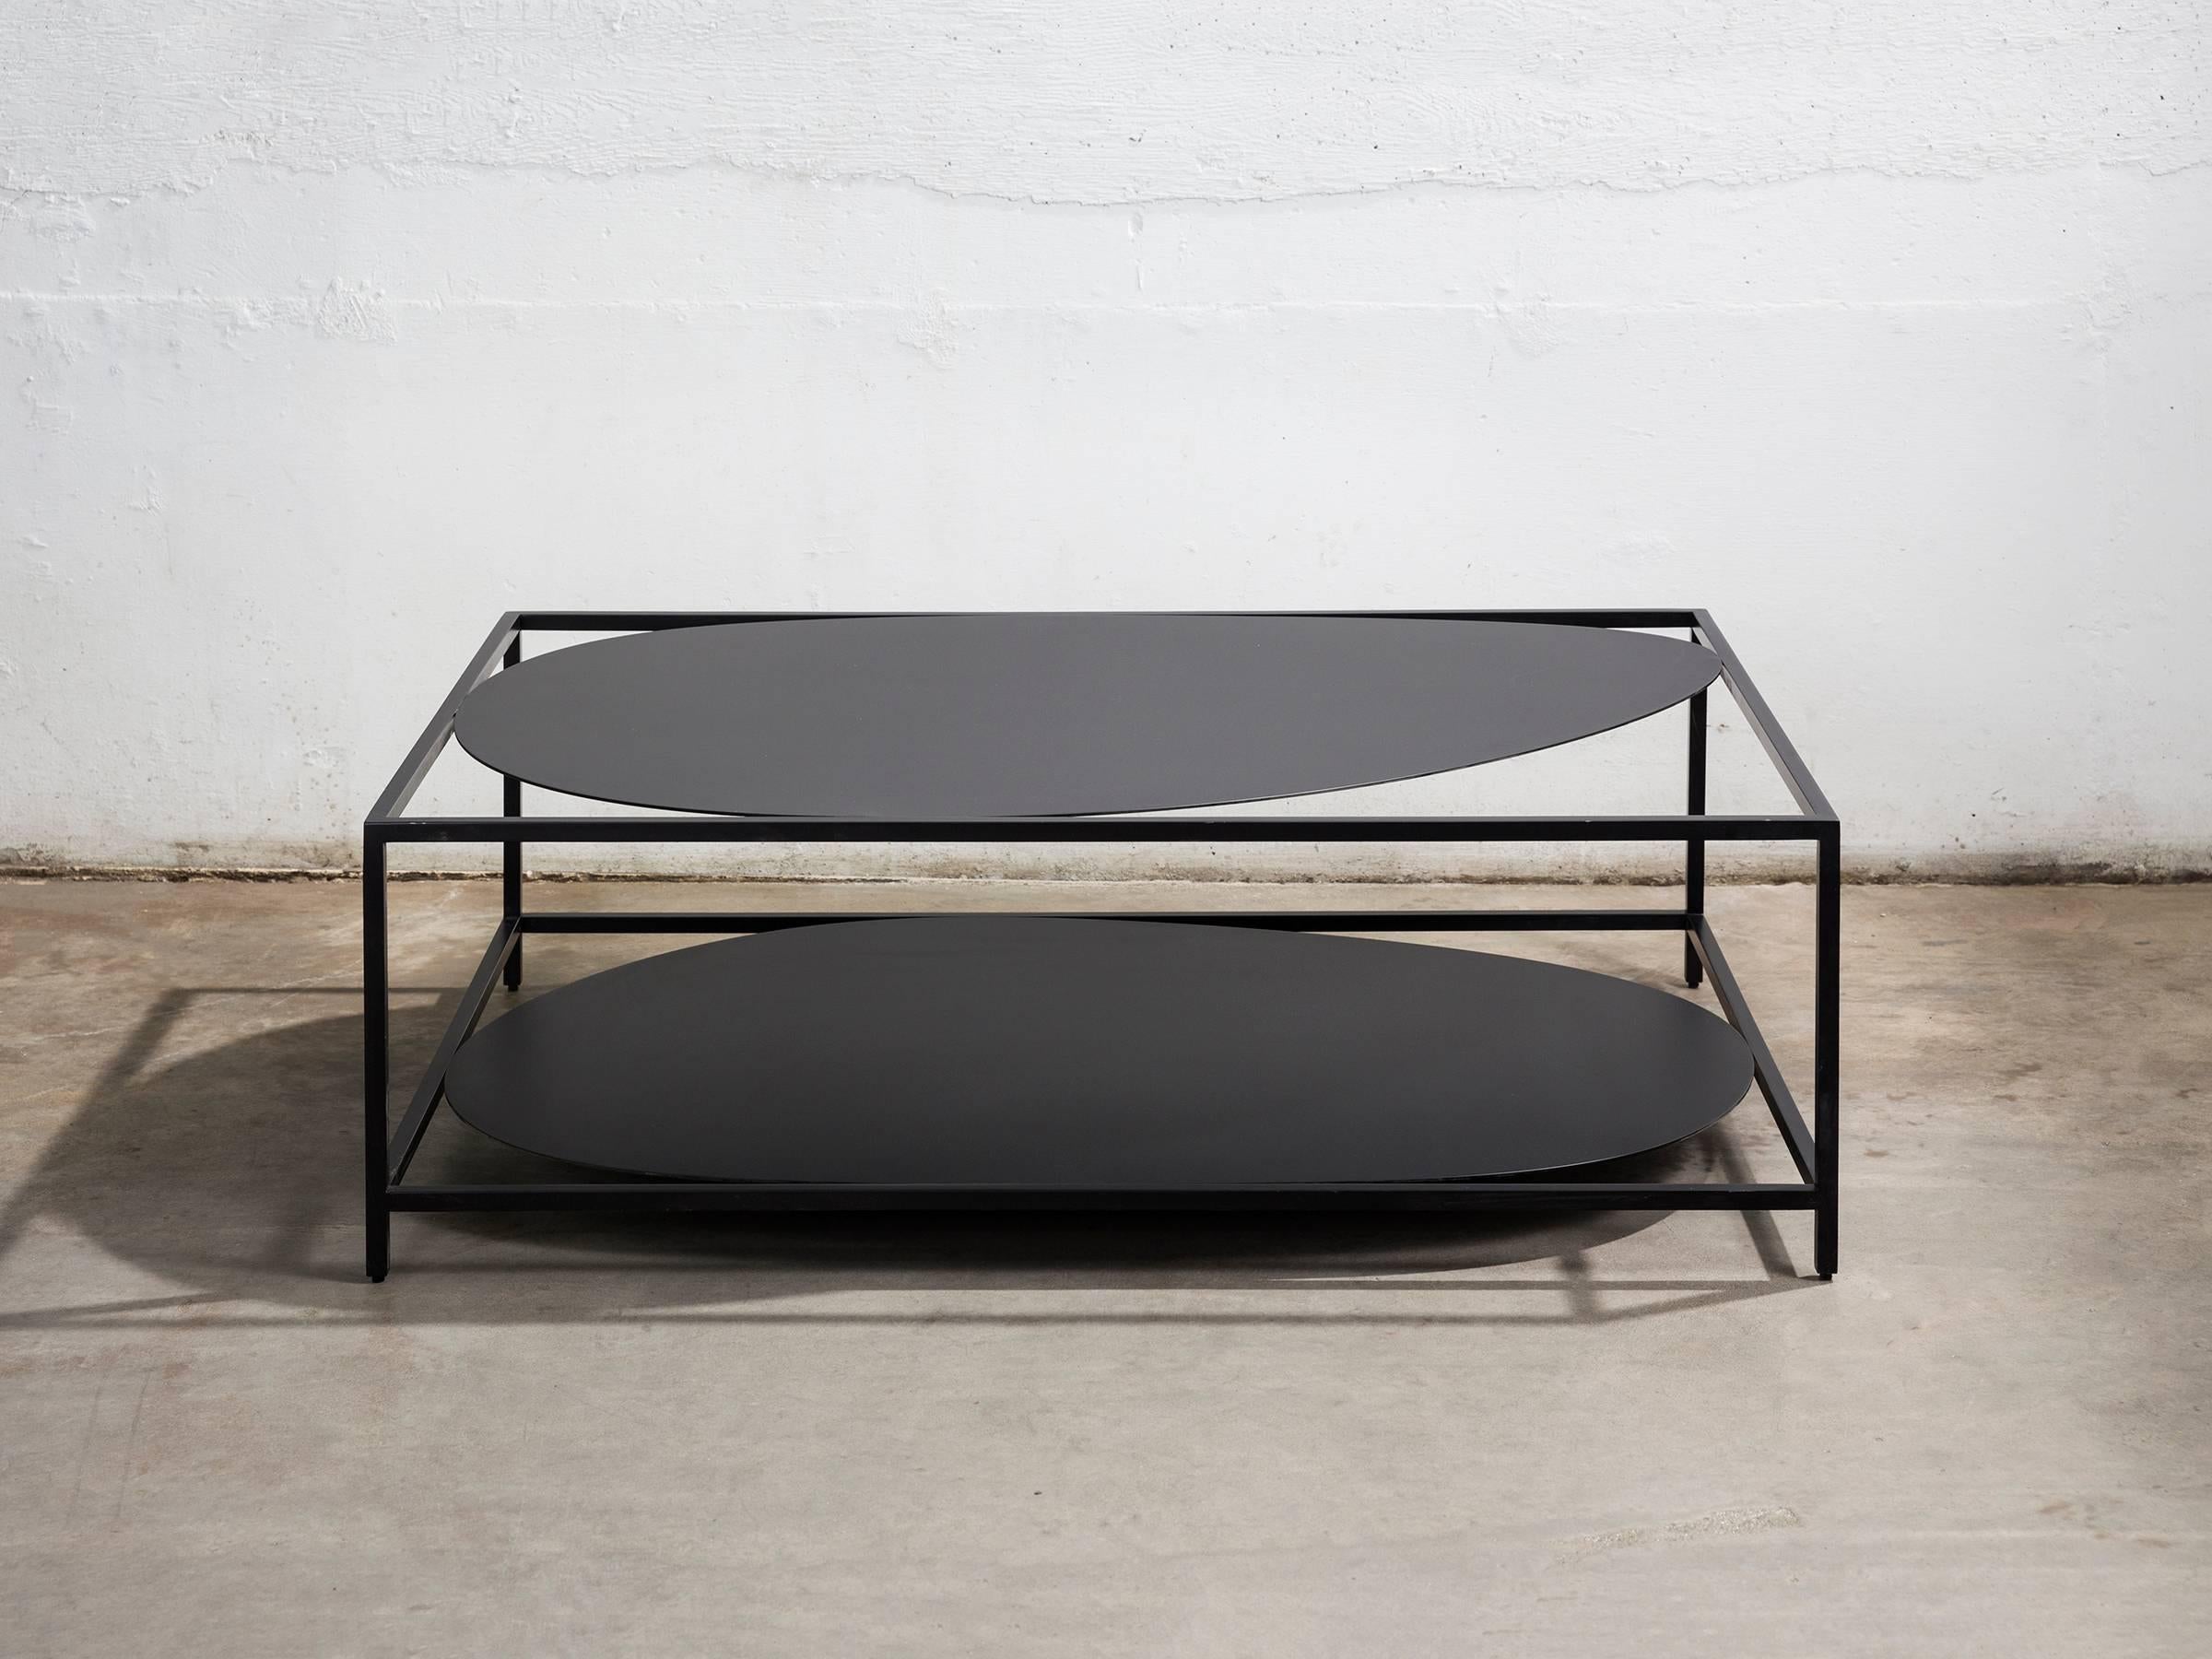 American Contemporary Minimal Black Organic Sculptural Steel Coffee Table, USA For Sale